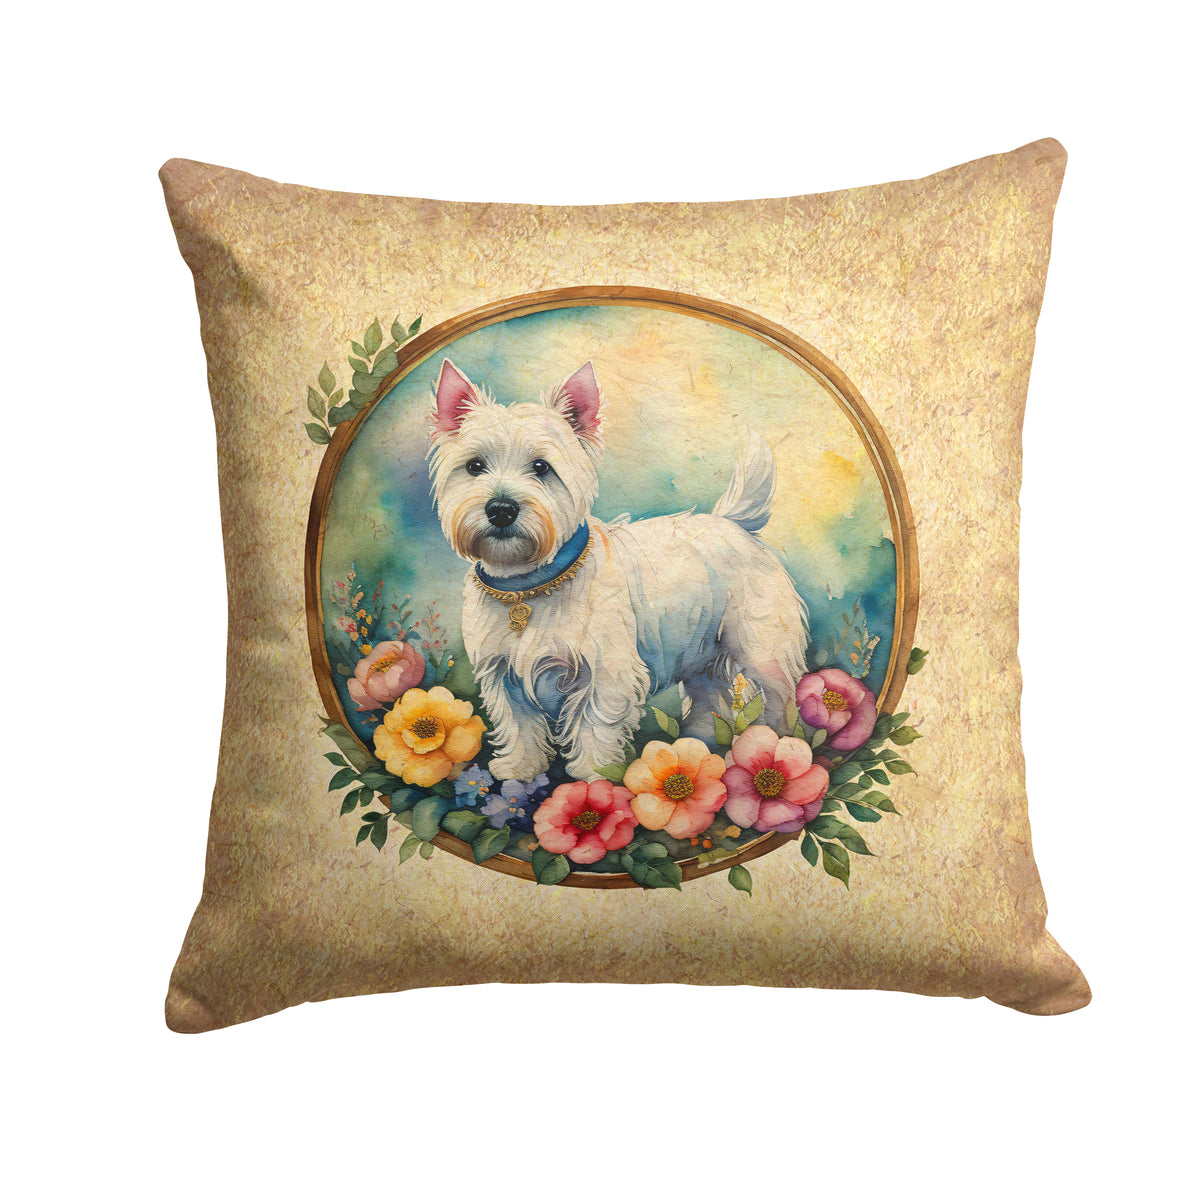 Buy this Westie and Flowers Fabric Decorative Pillow